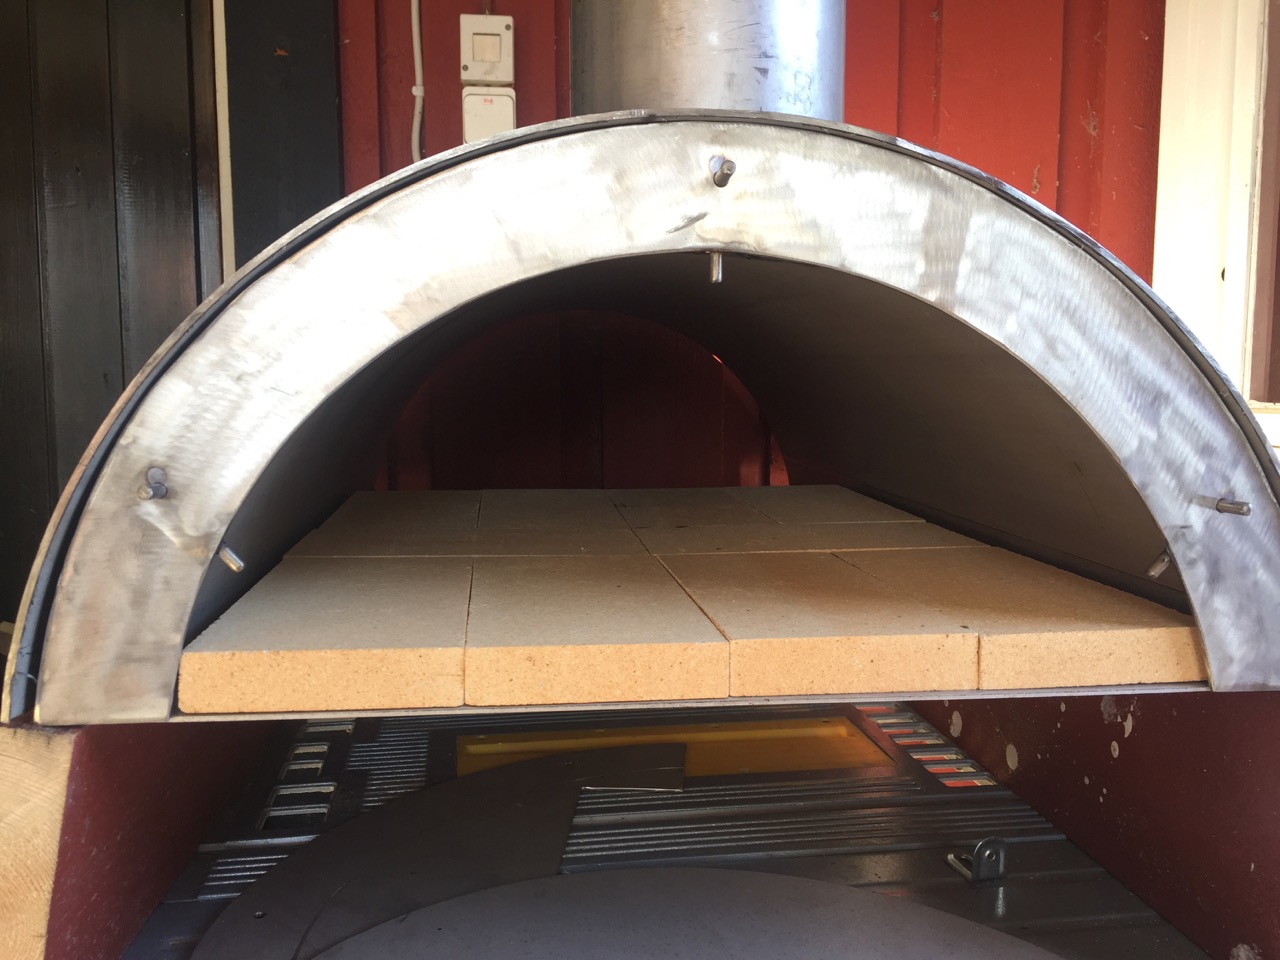 Verwonderend DIY Wood fired Pizza oven from Stainless Steel Pipe - Bskog DIY VY-16